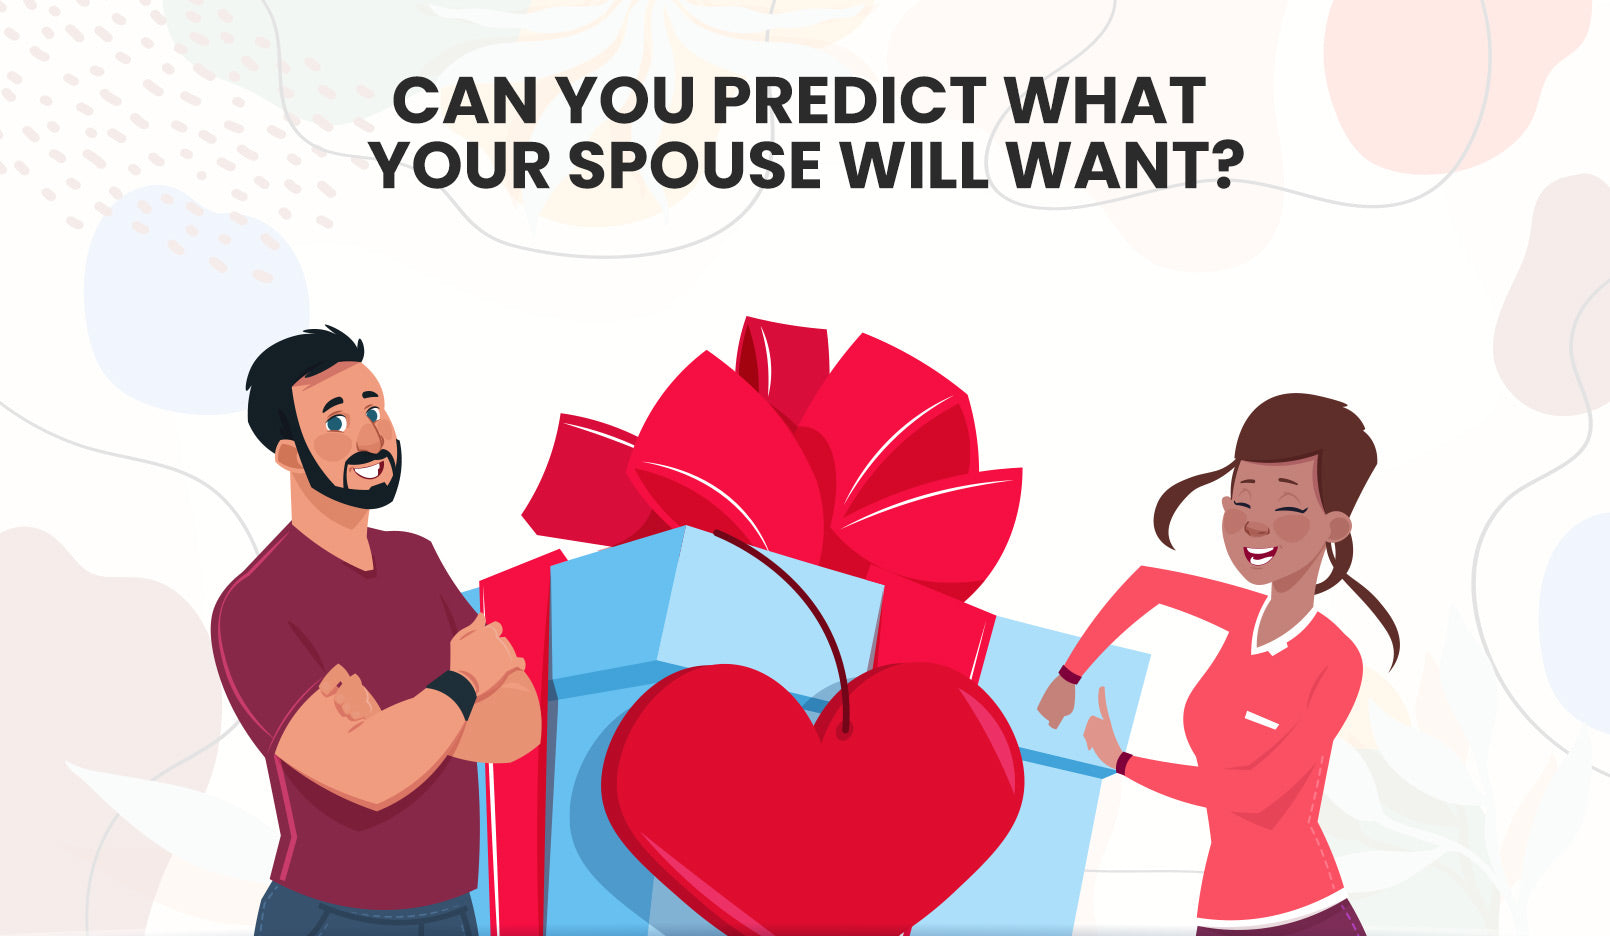 Can You Predict What Your Spouse Will Want?